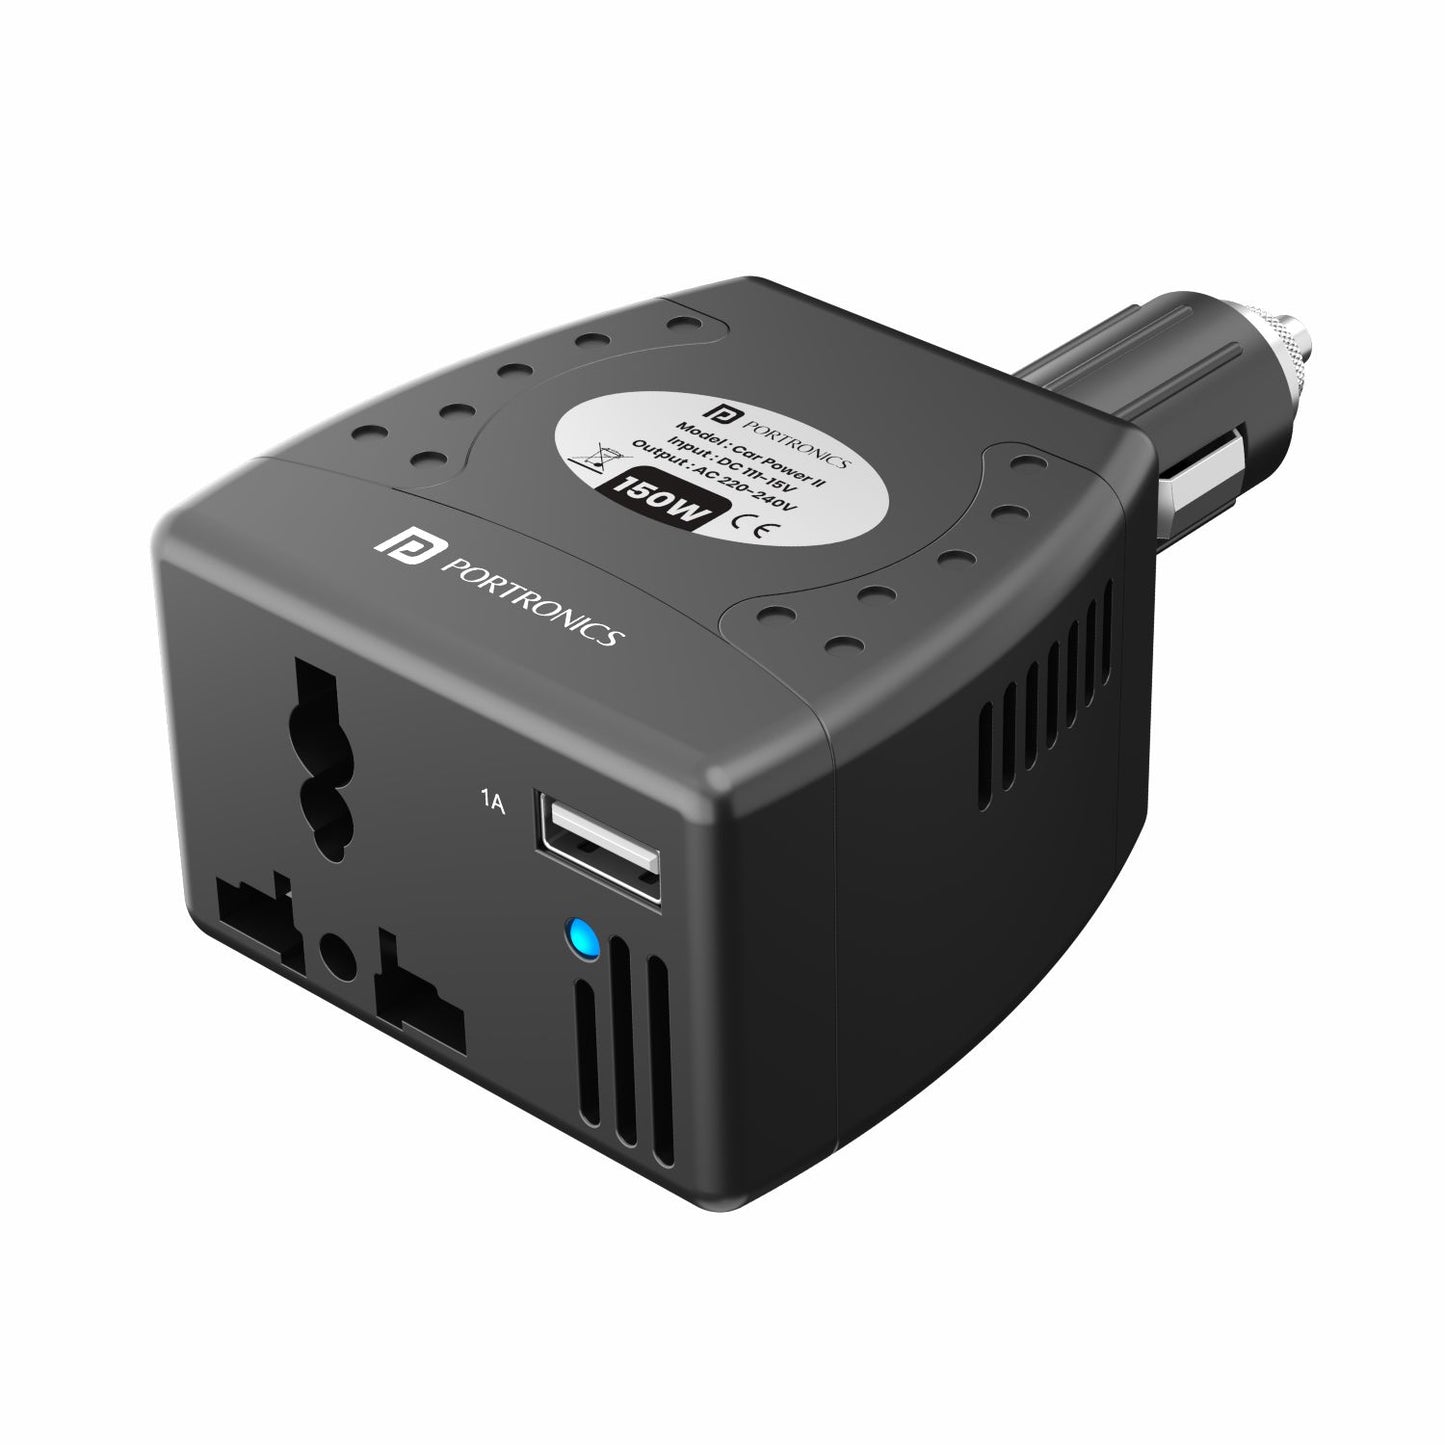 Portronics Car Power II 150w car power inverter with fast charging| car accessories at discount rate| car phone charger